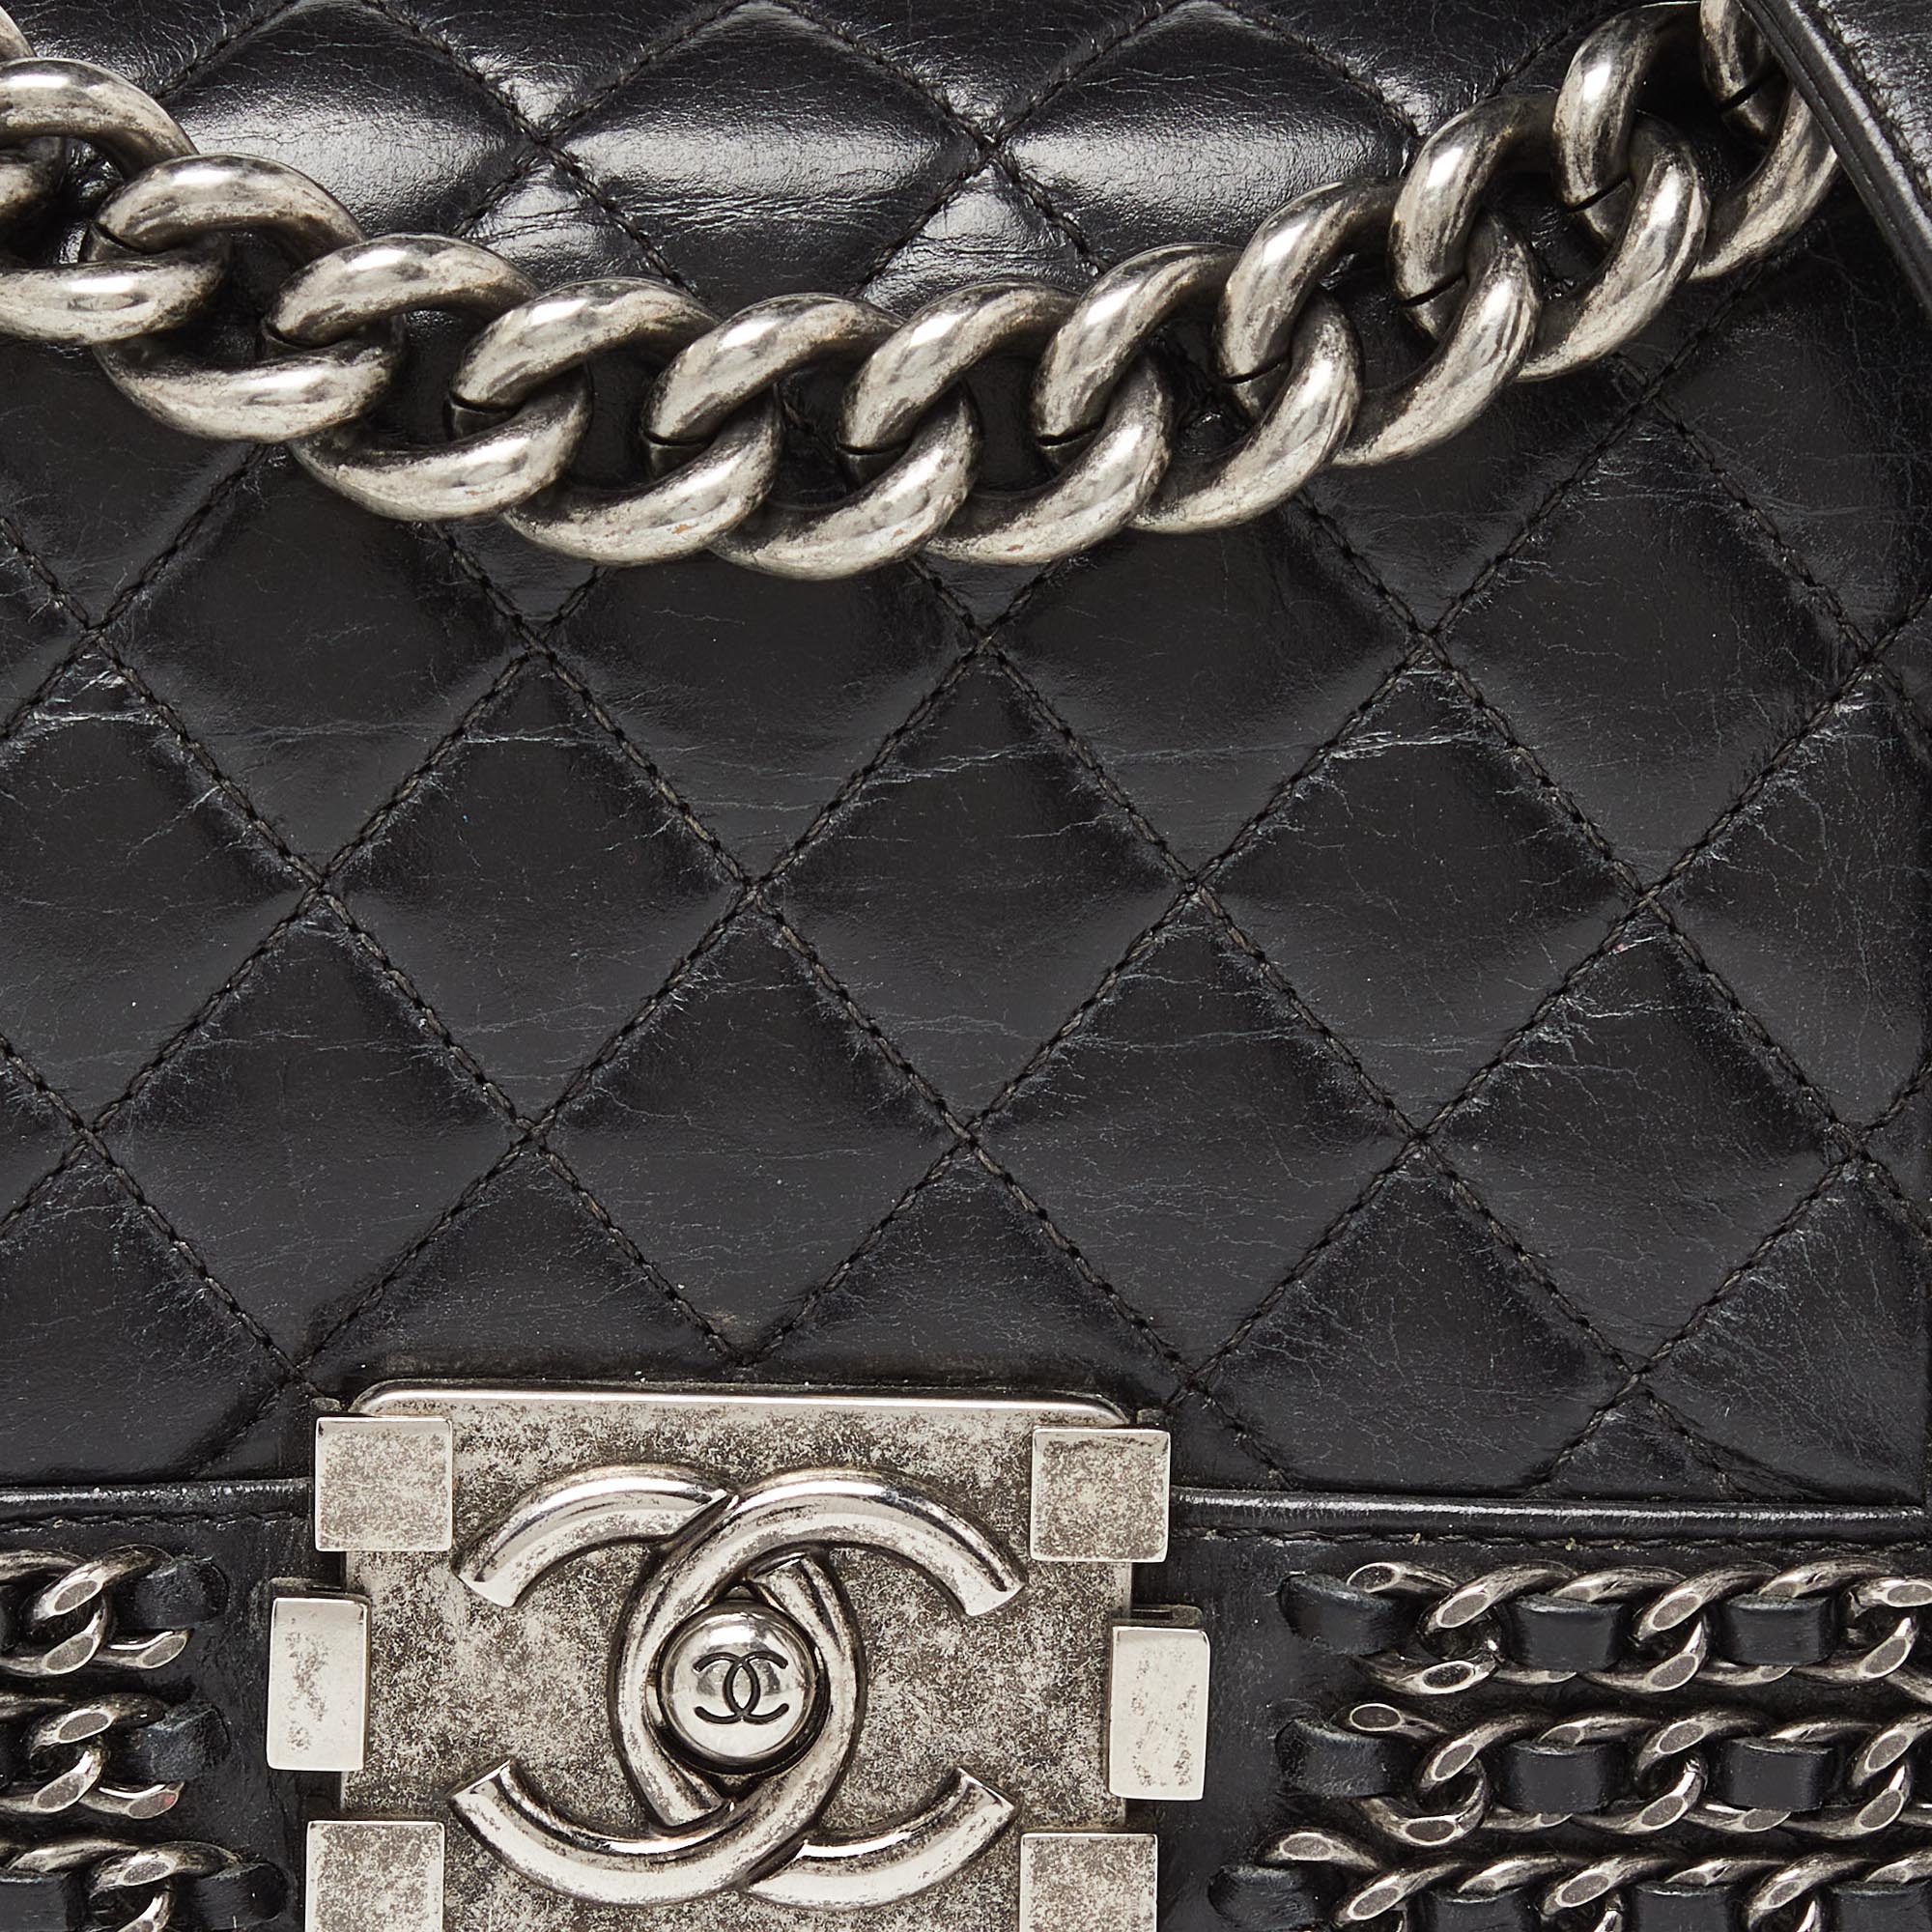 Chanel Black Quilted Leather Small Boy Chained Flap Bag